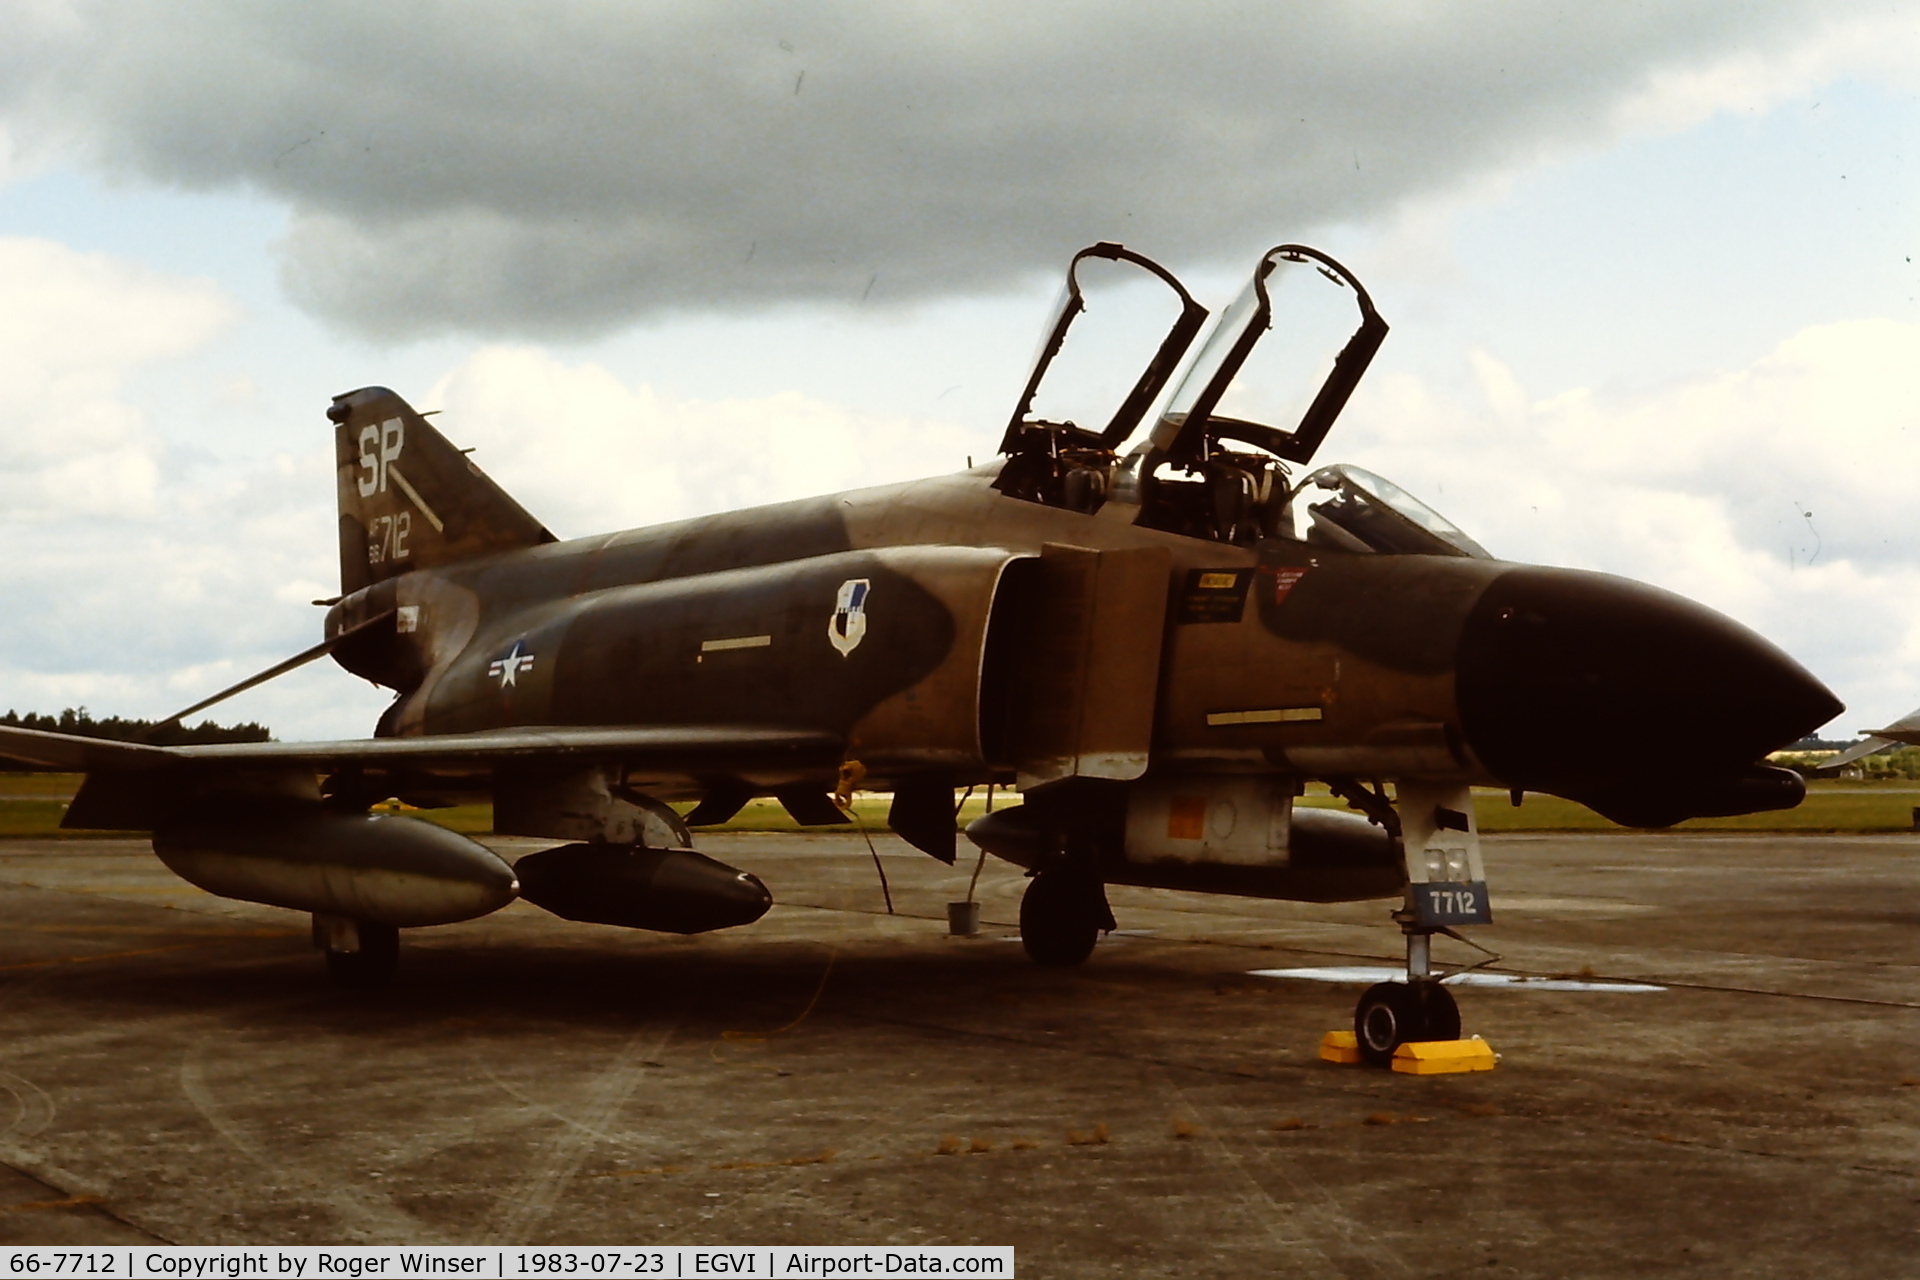 66-7712, 1966 McDonnell F-4D Phantom II C/N 2328, Coded SP of 52TFW attending the IAT at RAF Greenham Common, UK in 1983